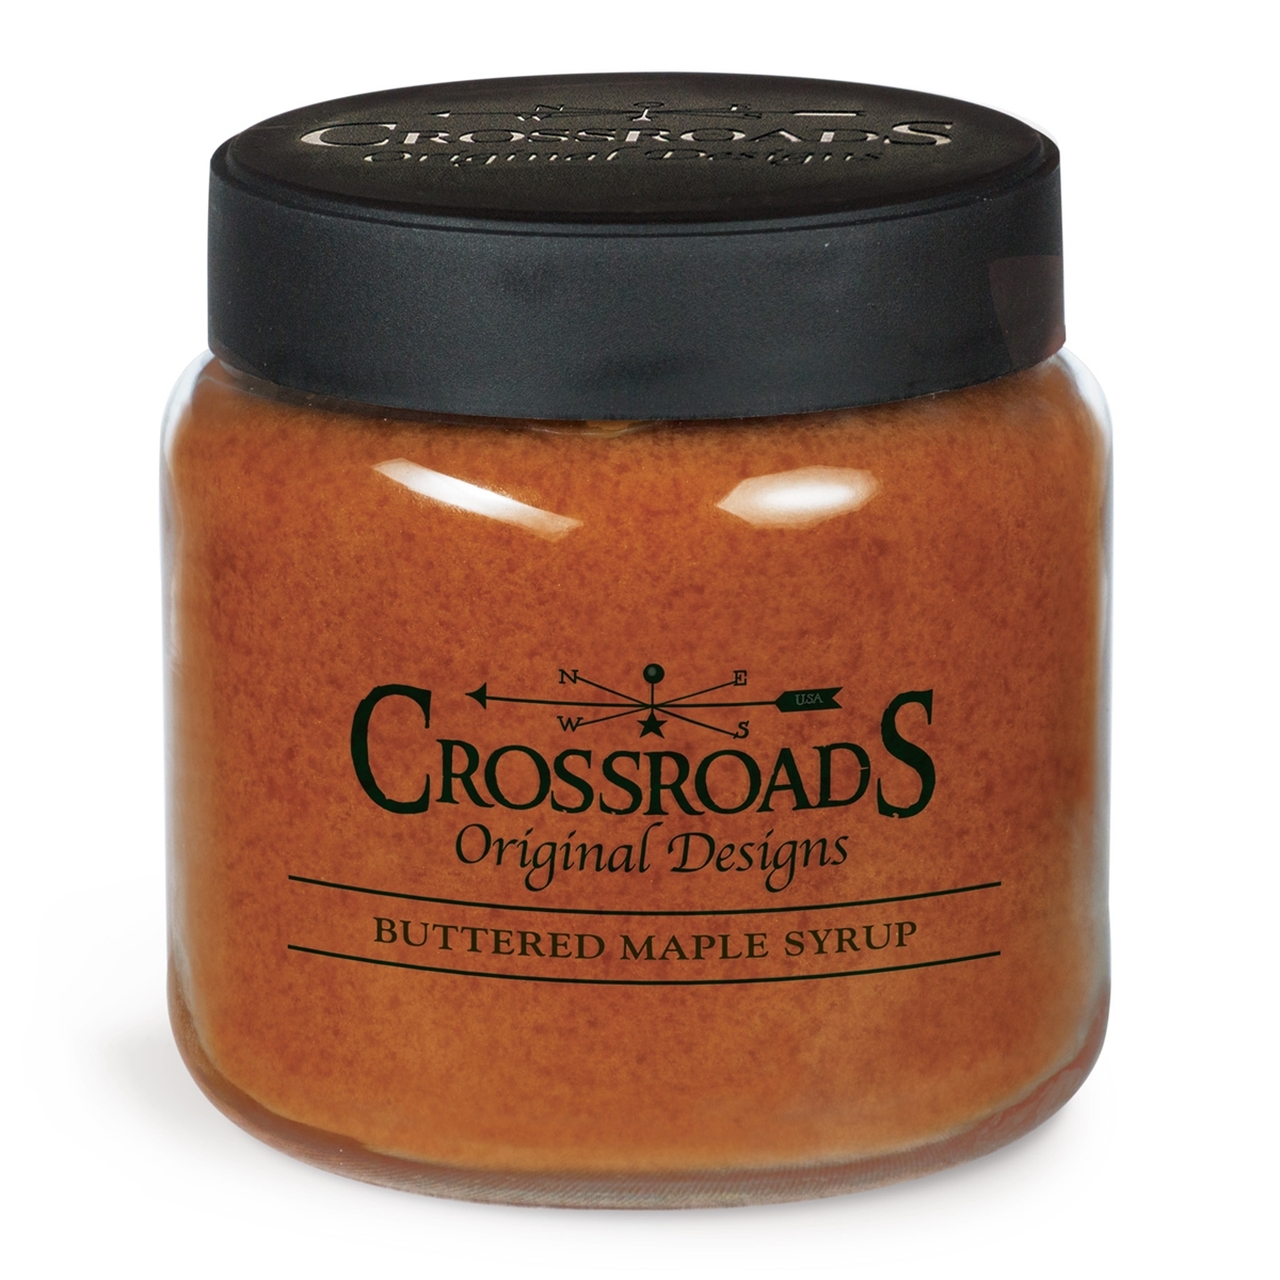 Buttered Maple Syrup Crossroads Candle-BMS16